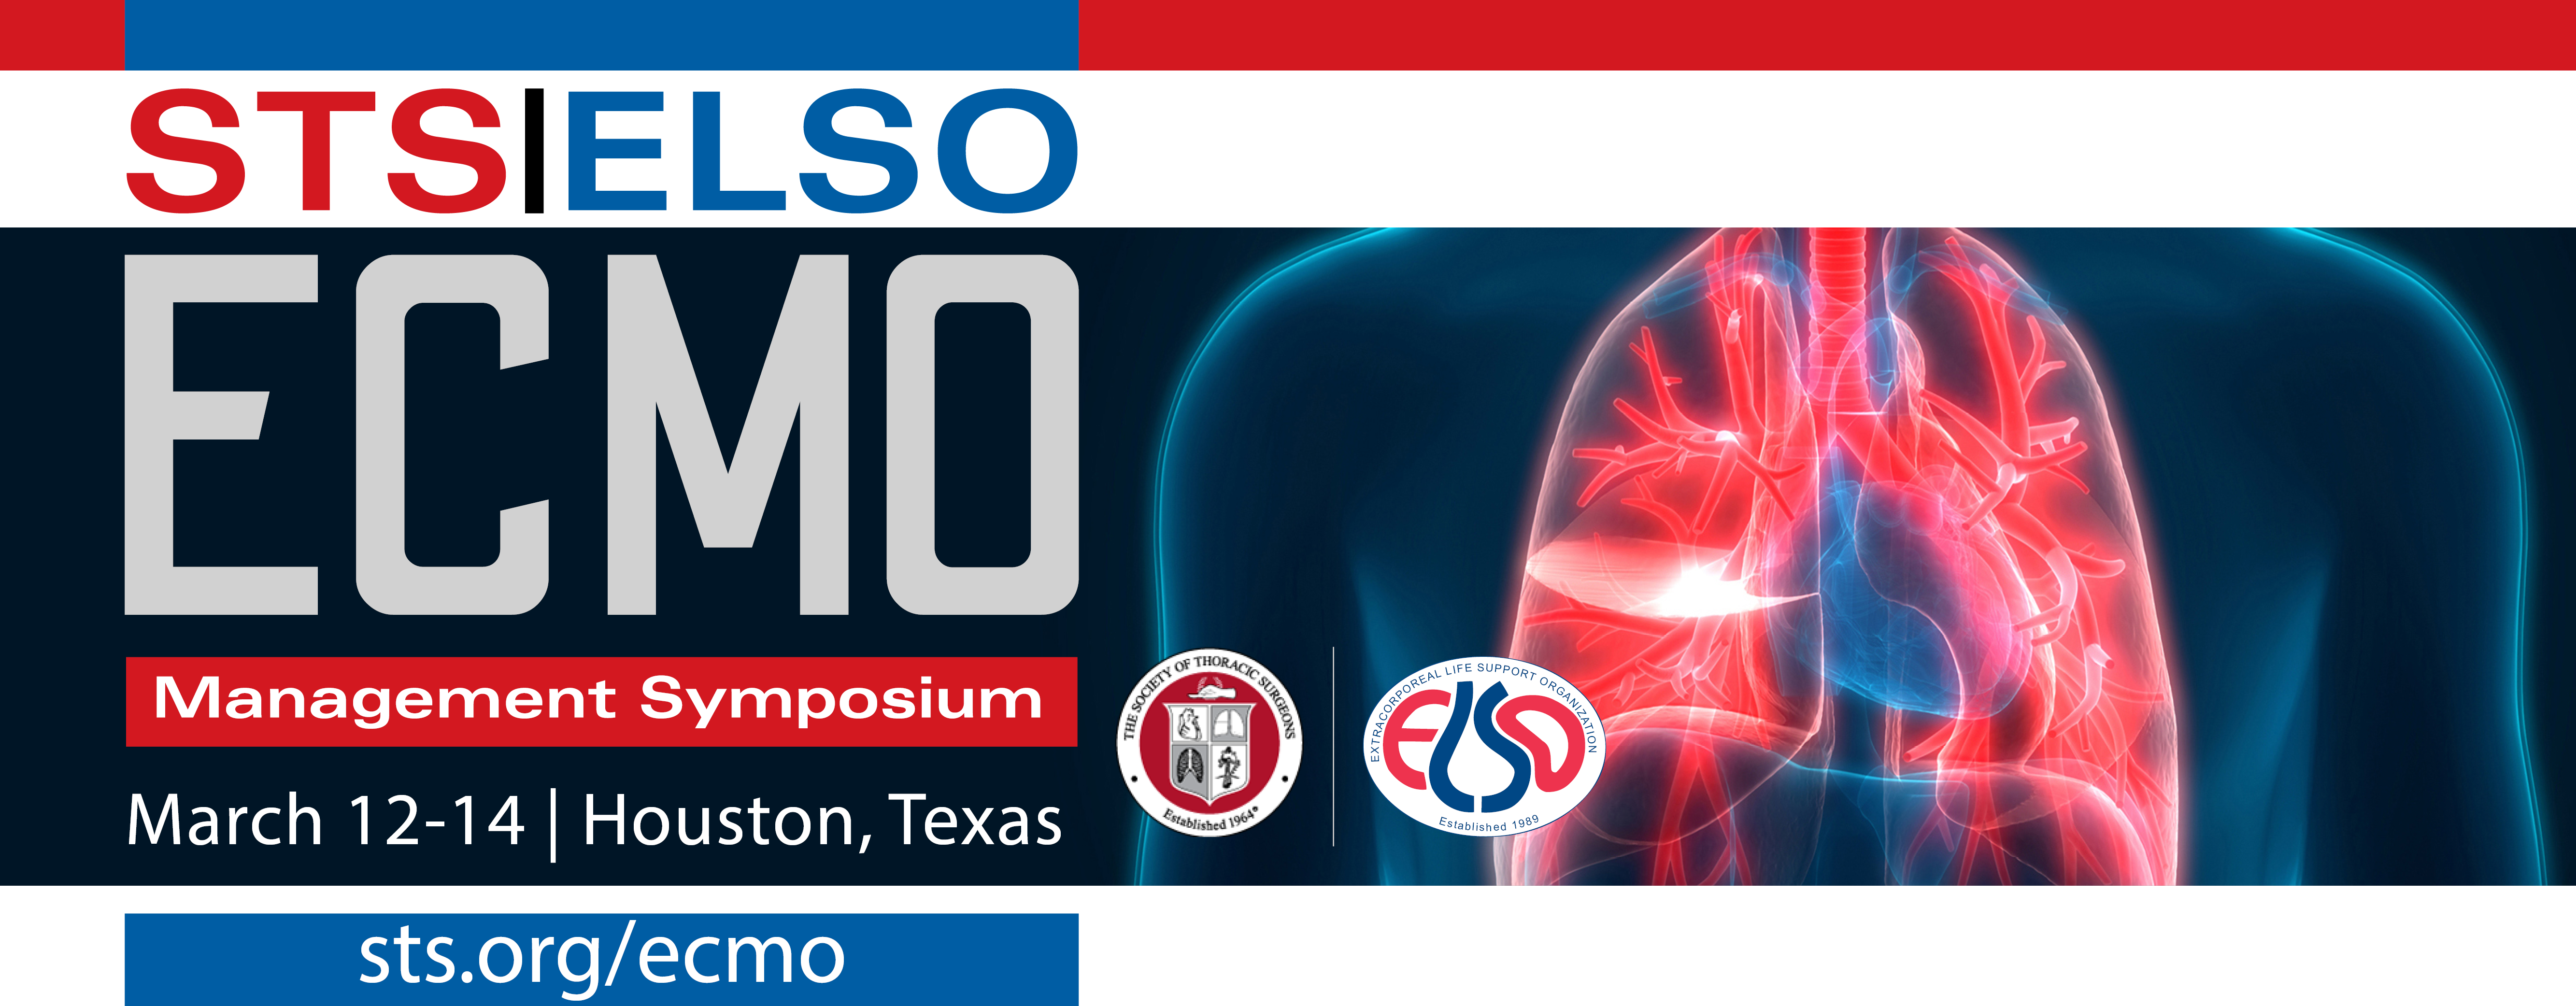 STS/ELSO ECMO Management Symposium STS